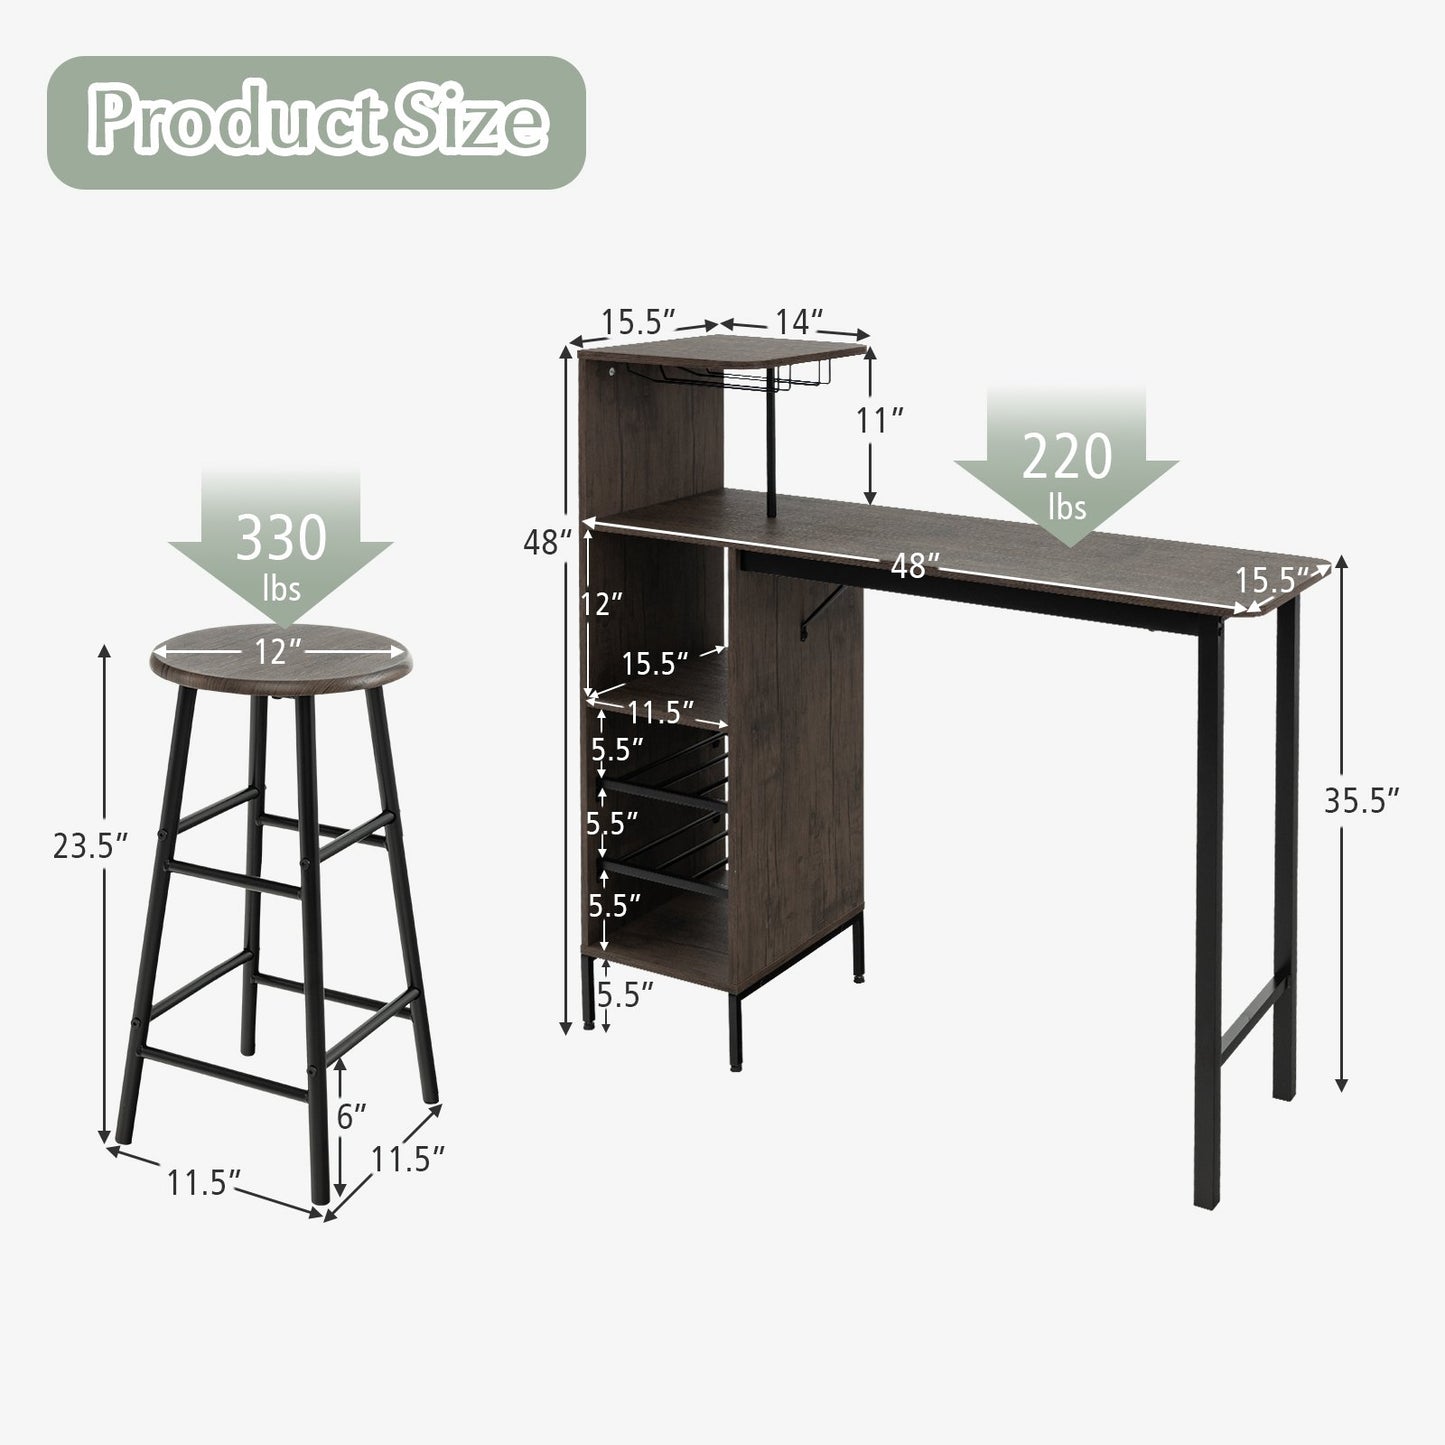 3 Piece Bar Table and Chairs Set with 6-Bottle Wine Rack, Brown